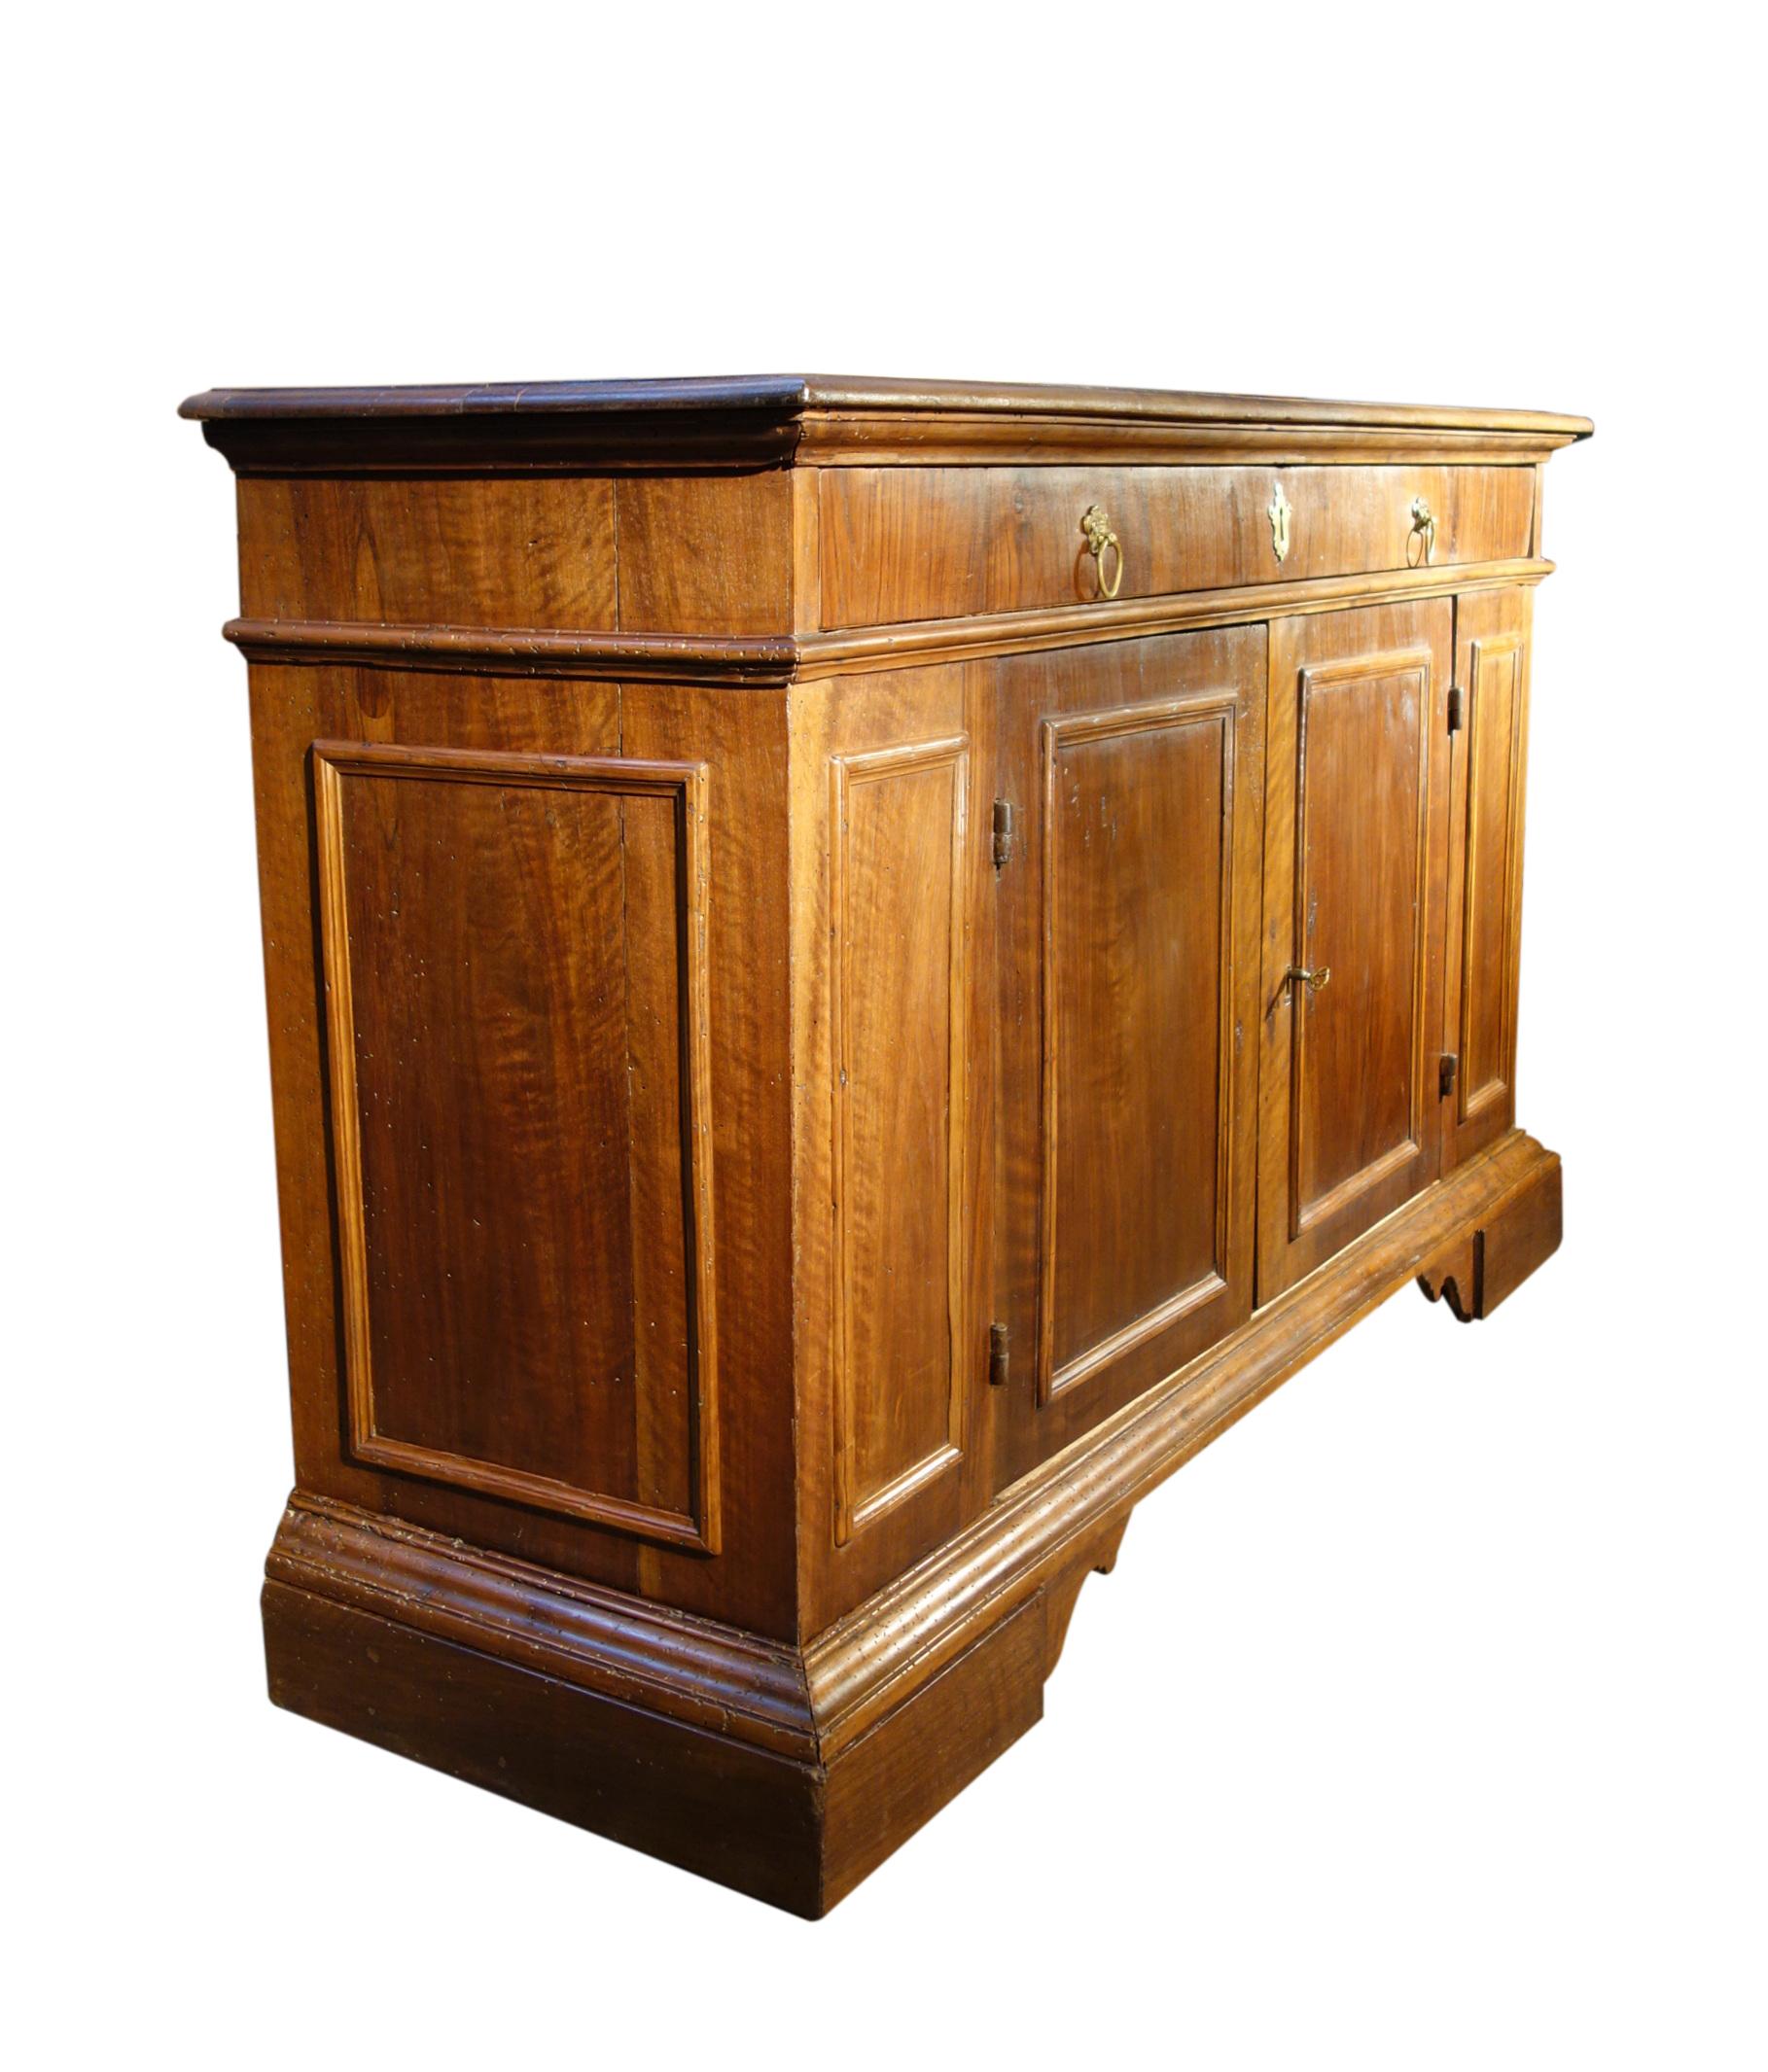 19th Century solid walnut Italian credenza with veneers, with pair of doors and single drawer. Simple, sturdy Tuscan style with brass hardware. Interior is clean with single fixed shelf. Lock and key on the right side door with interior shelf latch